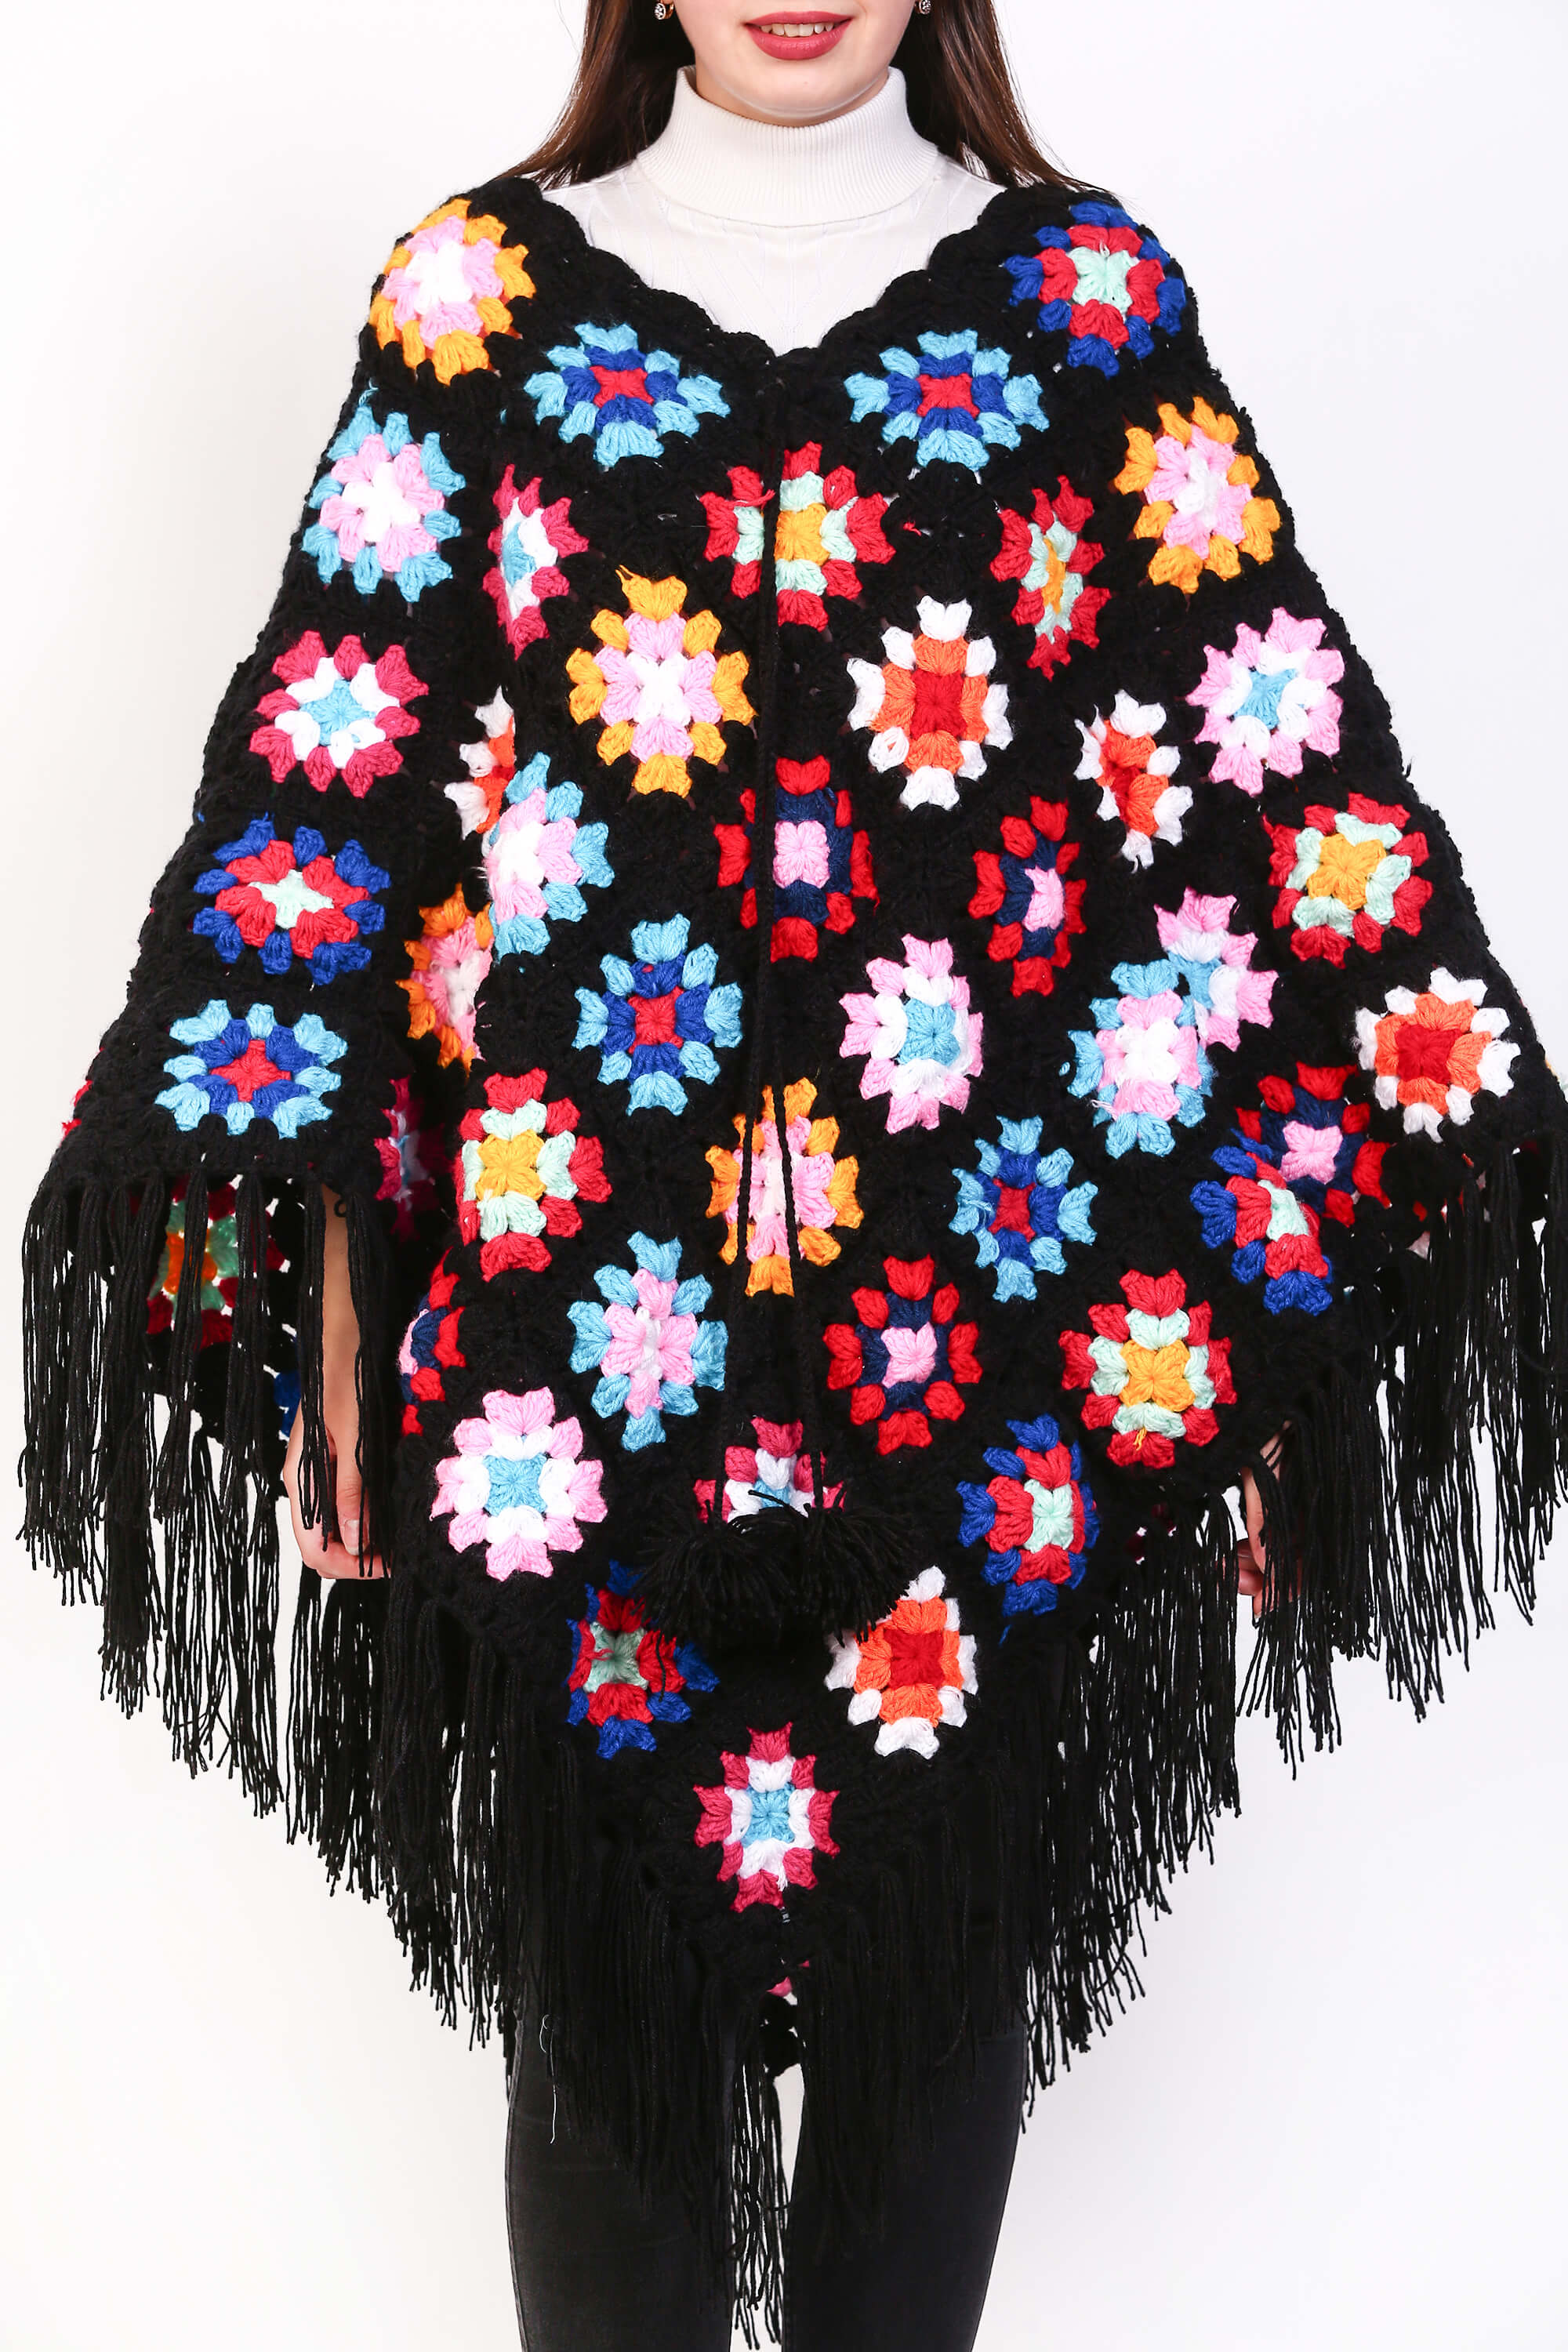 Crafted with Love Crochet Poncho